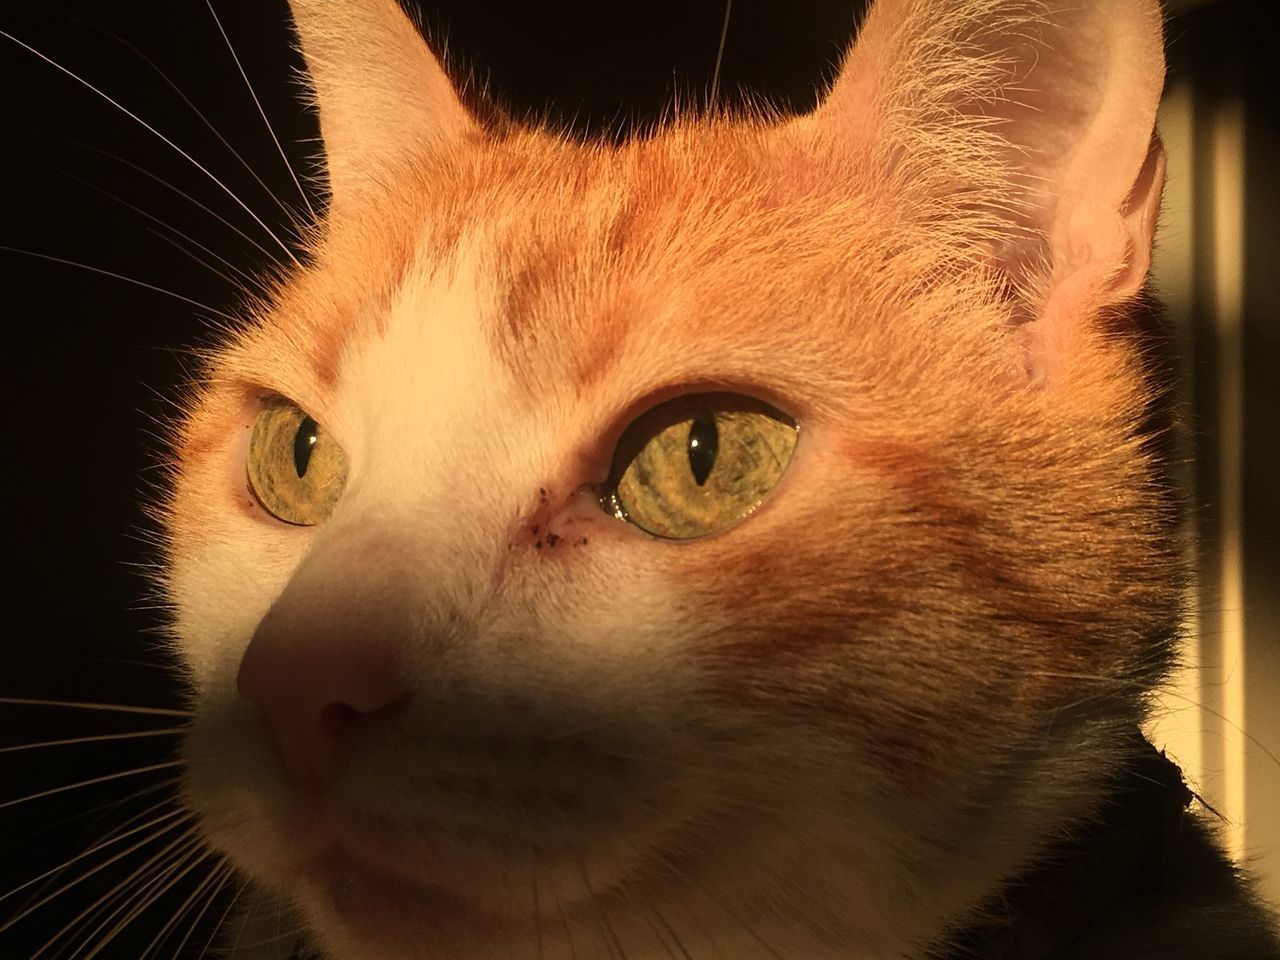 cat, domestic cat, feline, domestic, pets, one animal, domestic animals, animal themes, mammal, animal, close-up, vertebrate, whisker, animal body part, no people, indoors, animal head, looking at camera, eye, portrait, animal eye, black background, snout, ginger cat